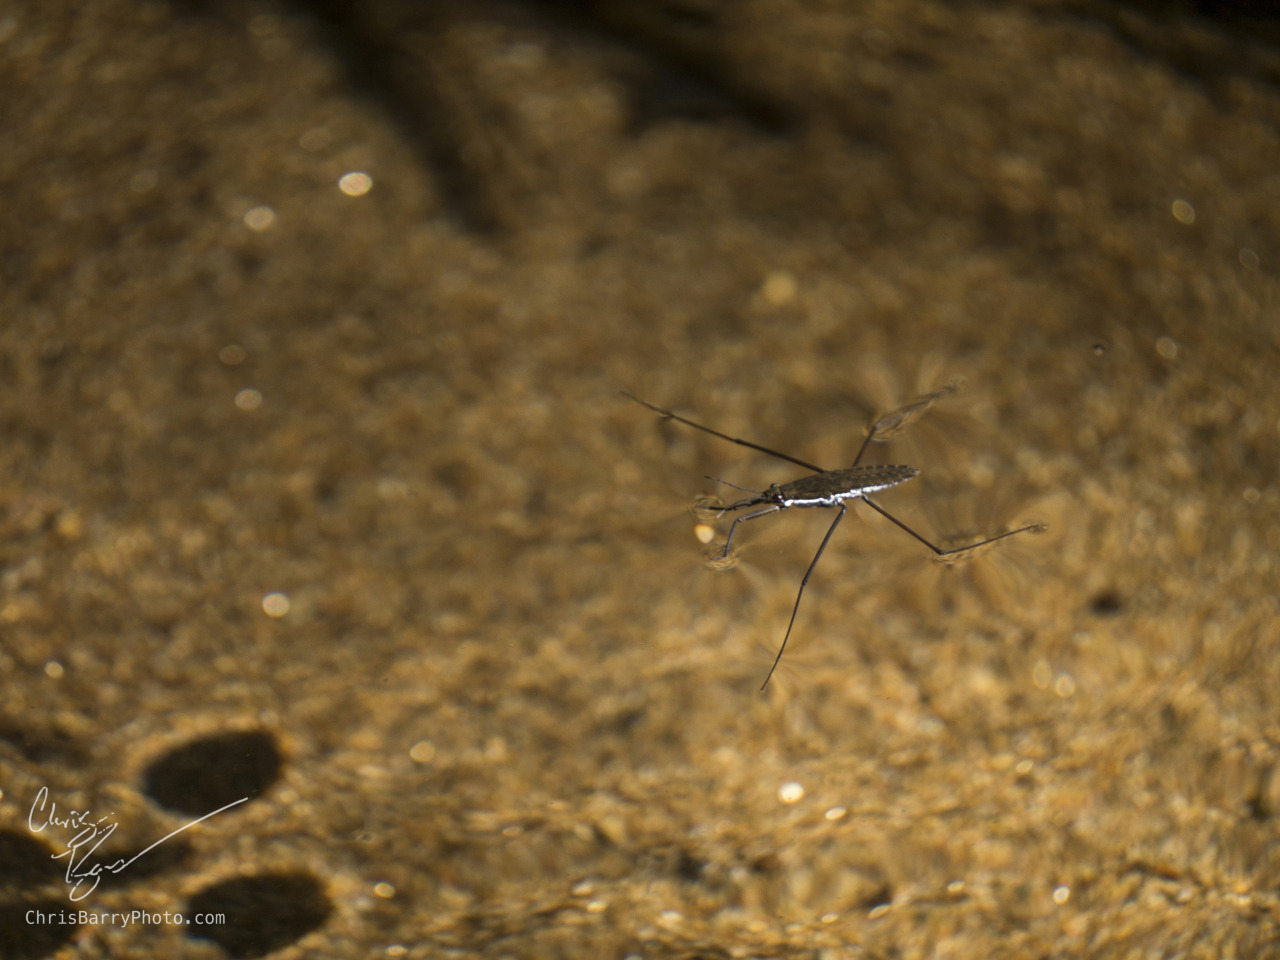 Water striders are hard